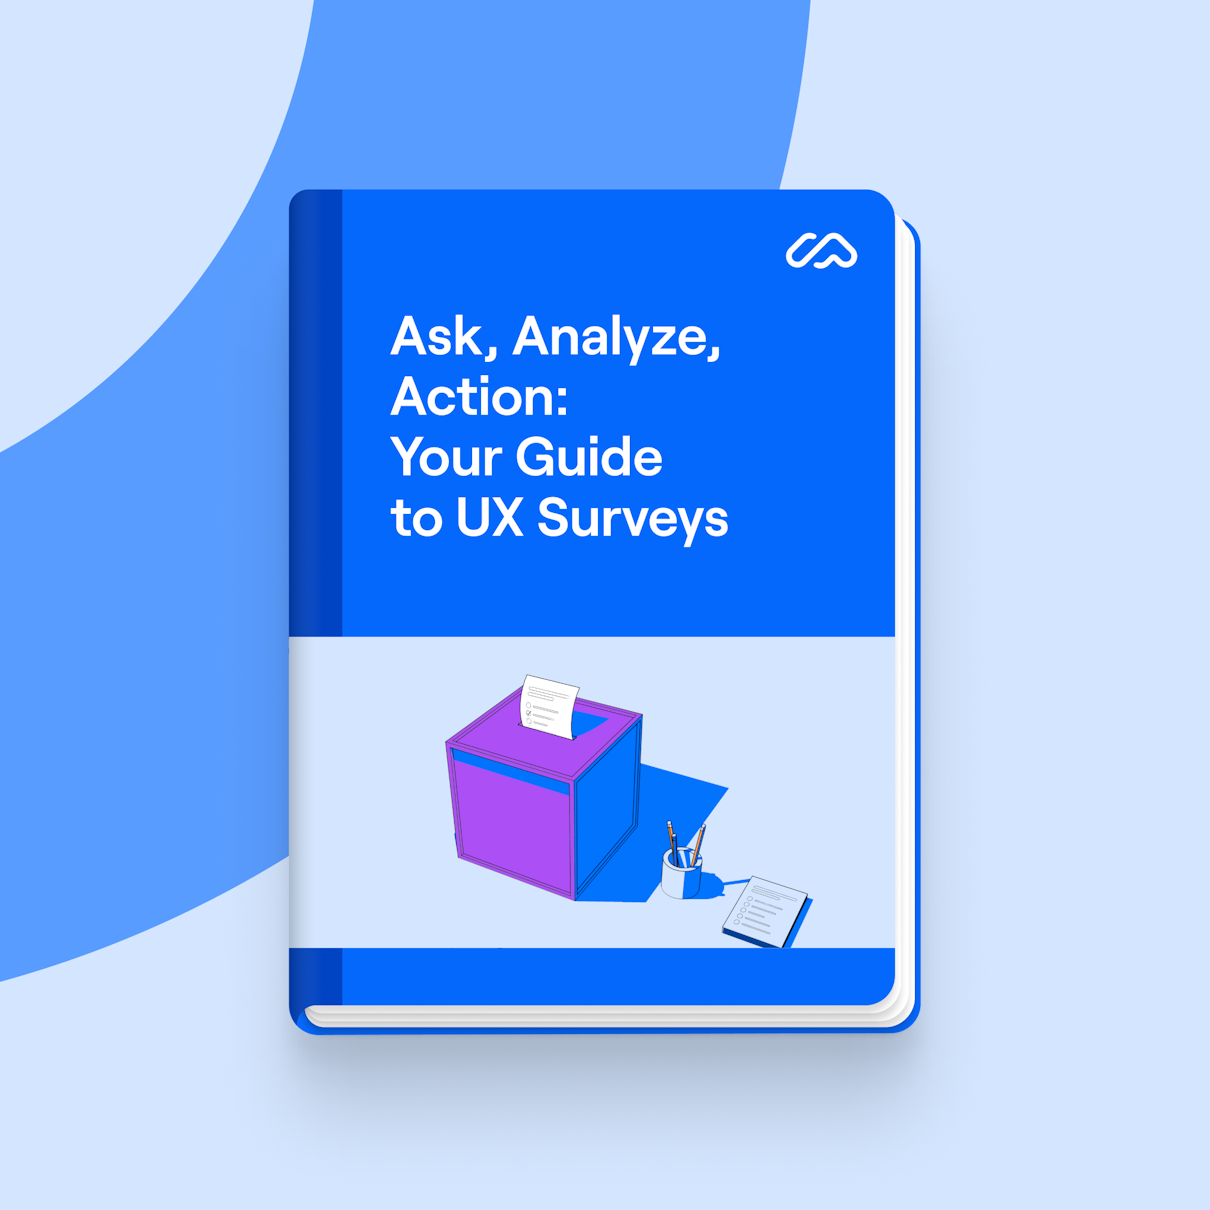 Ask, Analyze, Action: Your Guide to UX Surveys